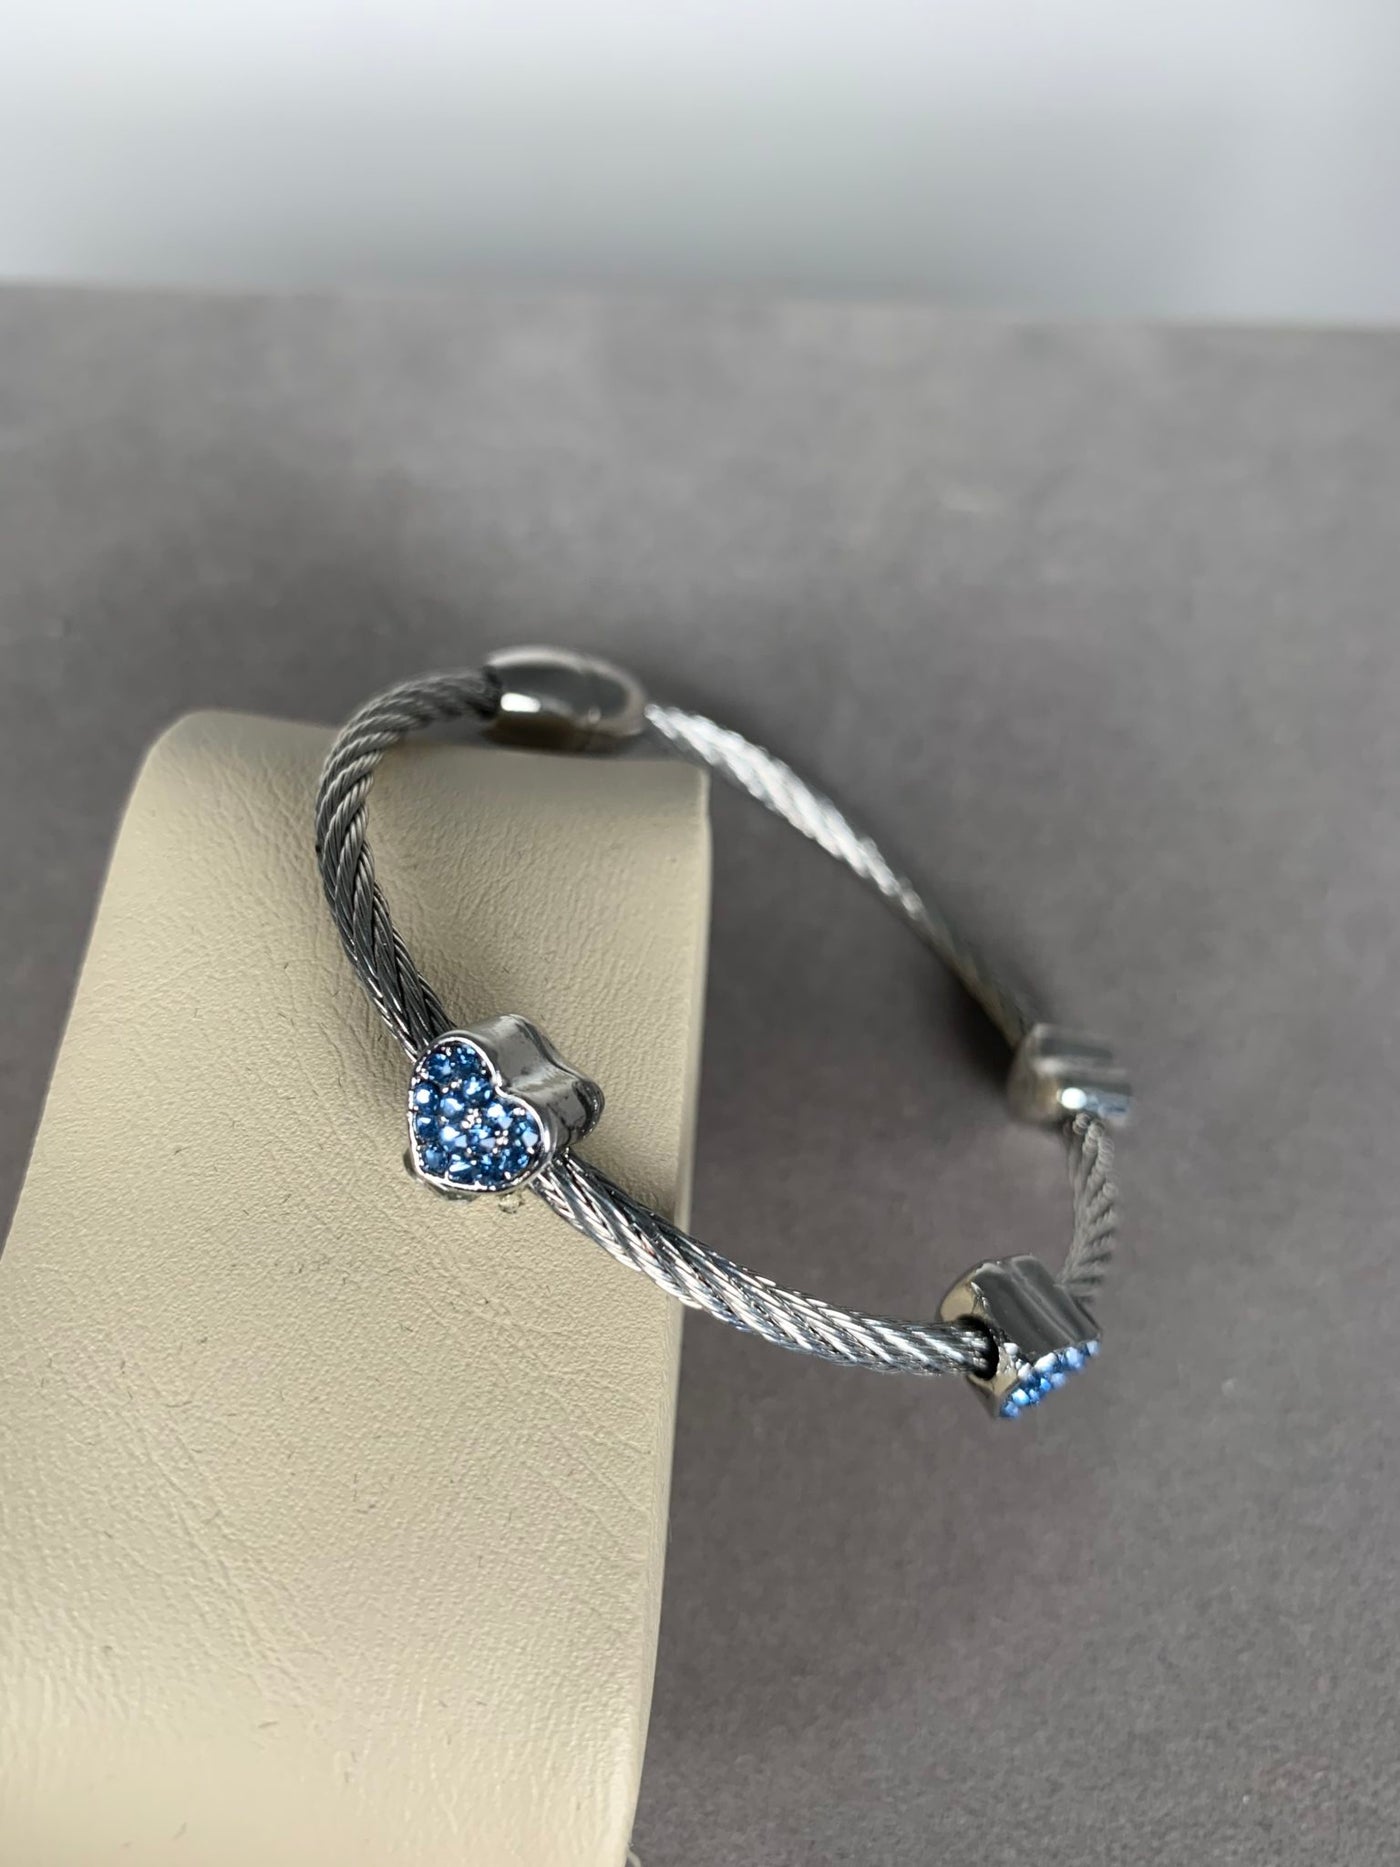 Silver Tone Wire Bangle Bracelet with 3 Blue Crystal Heart Motifs